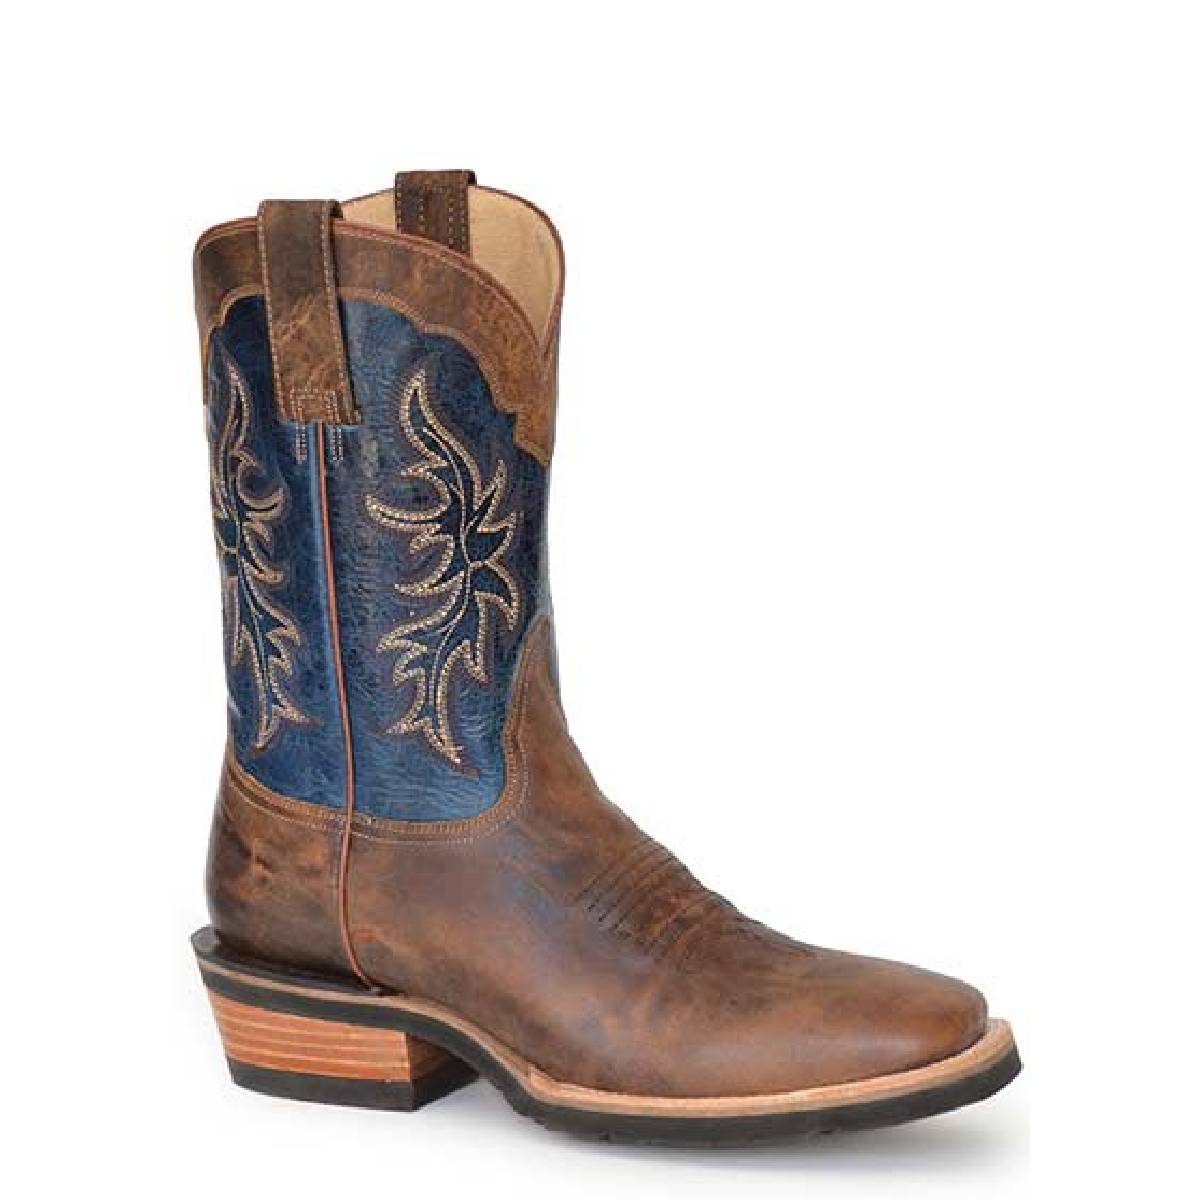 Men's Roper Ride 'Em Cowboy Leather GEO Sole Boots Handcrafted Tan - yeehawcowboy